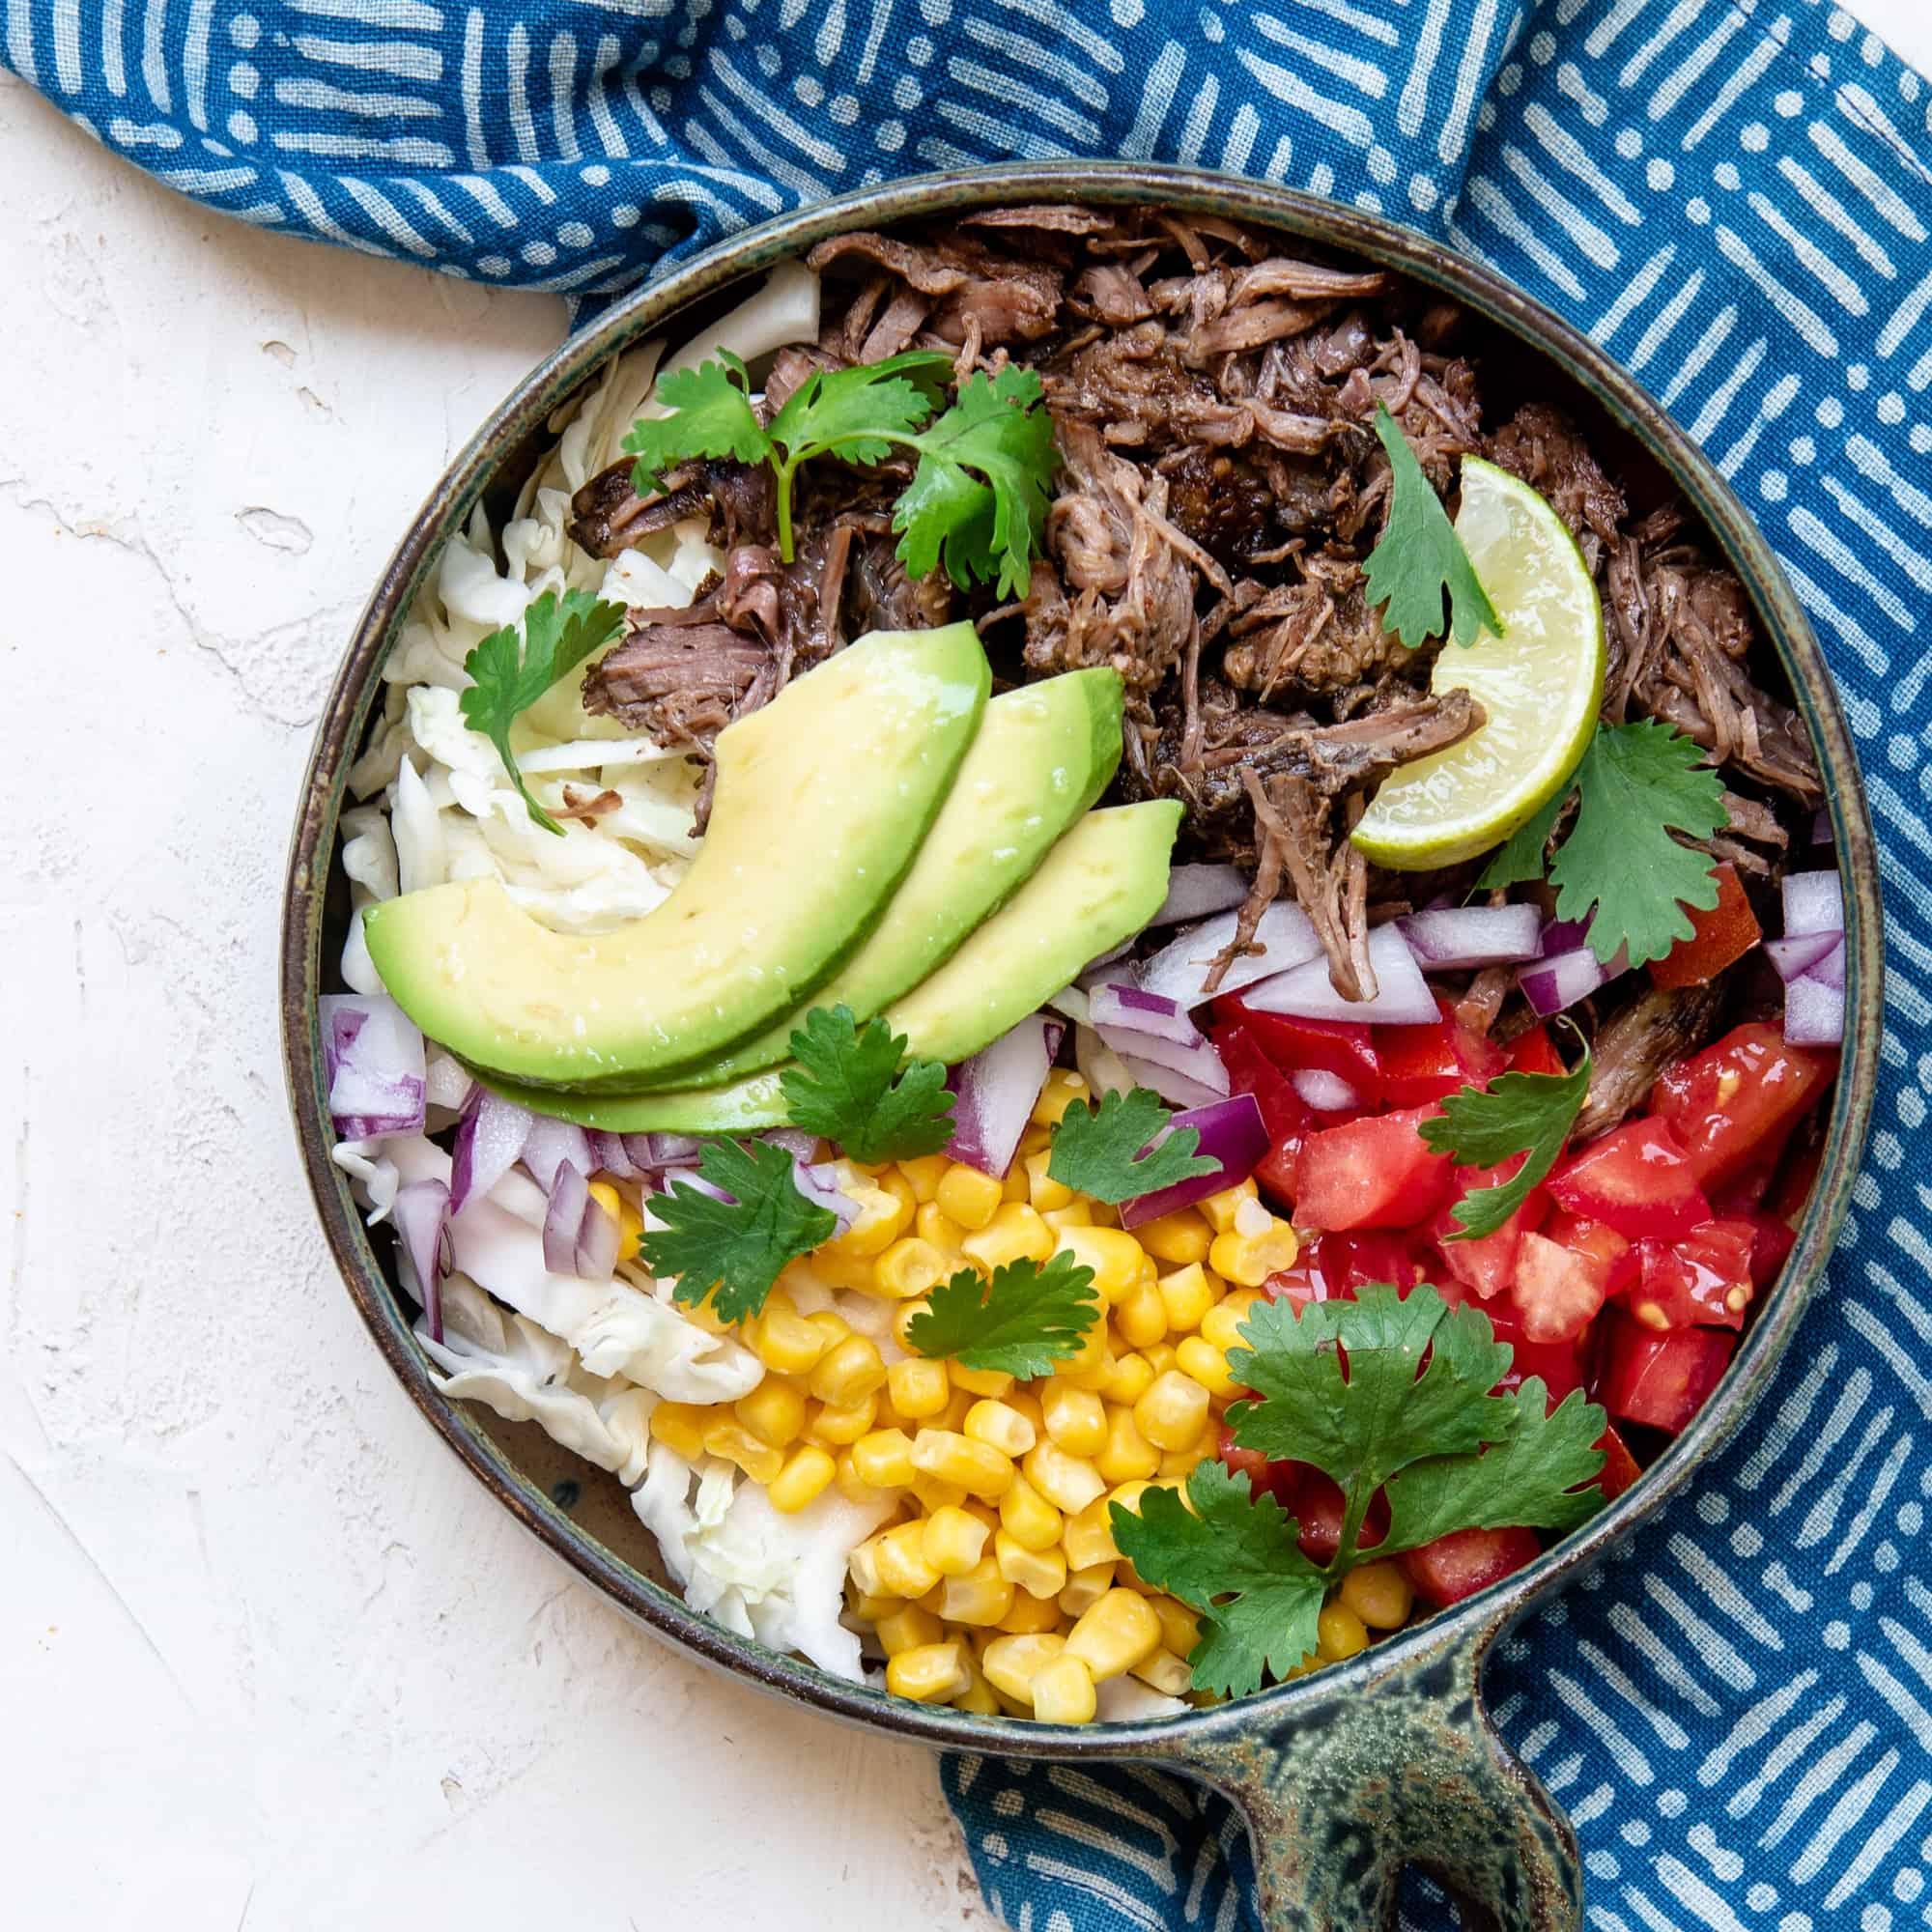 Burrito bowl with barbecue of spicy meat, avocado, tomatoes, lime, cilantro, cabbage and corn next to a blue pattern napkin